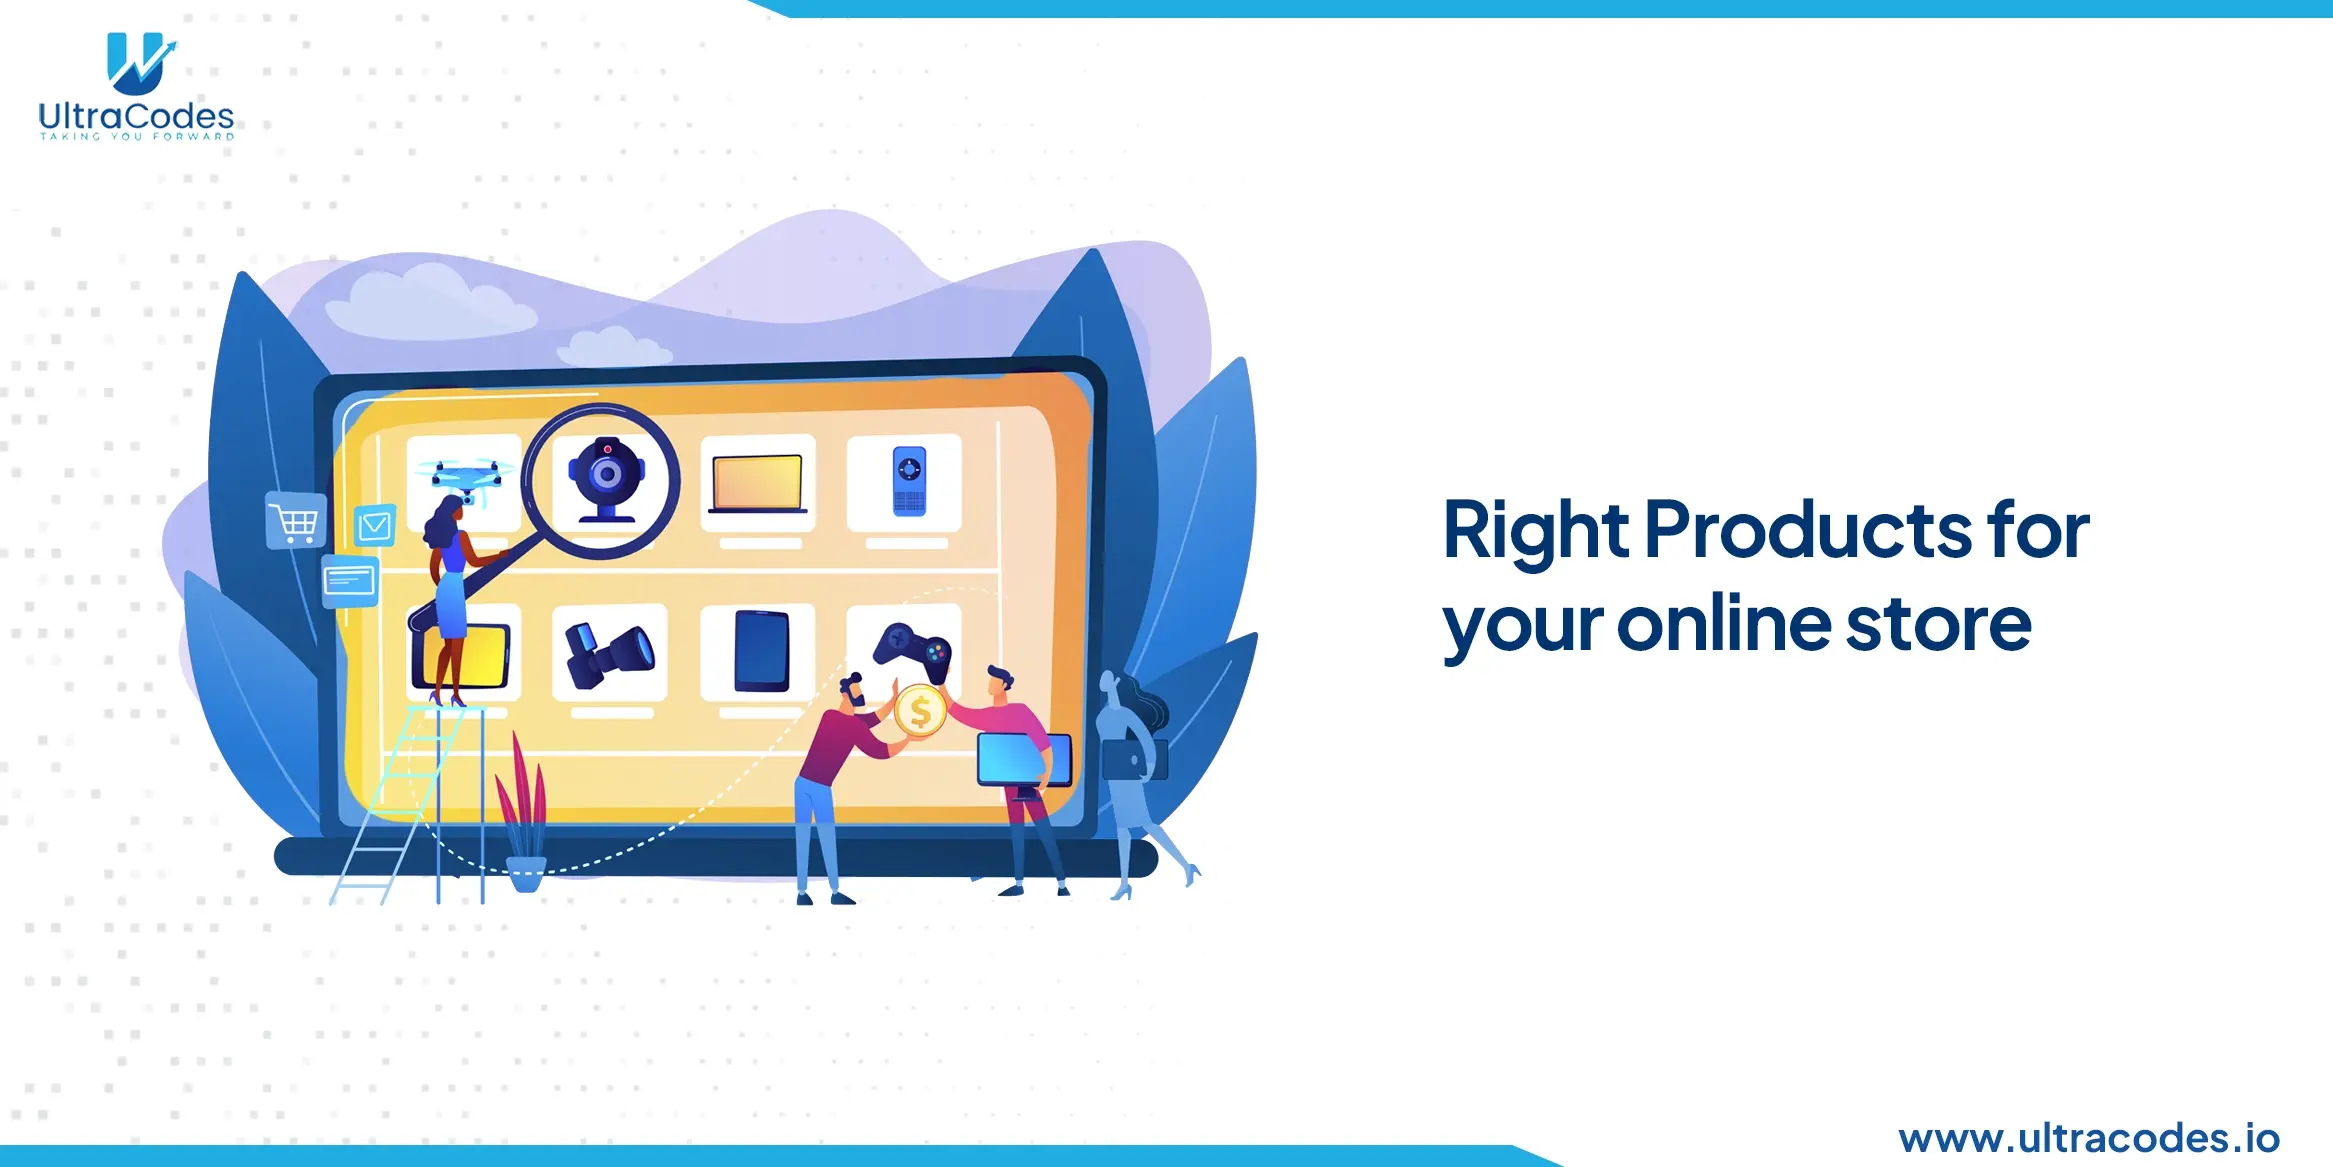 Right Products for your online store